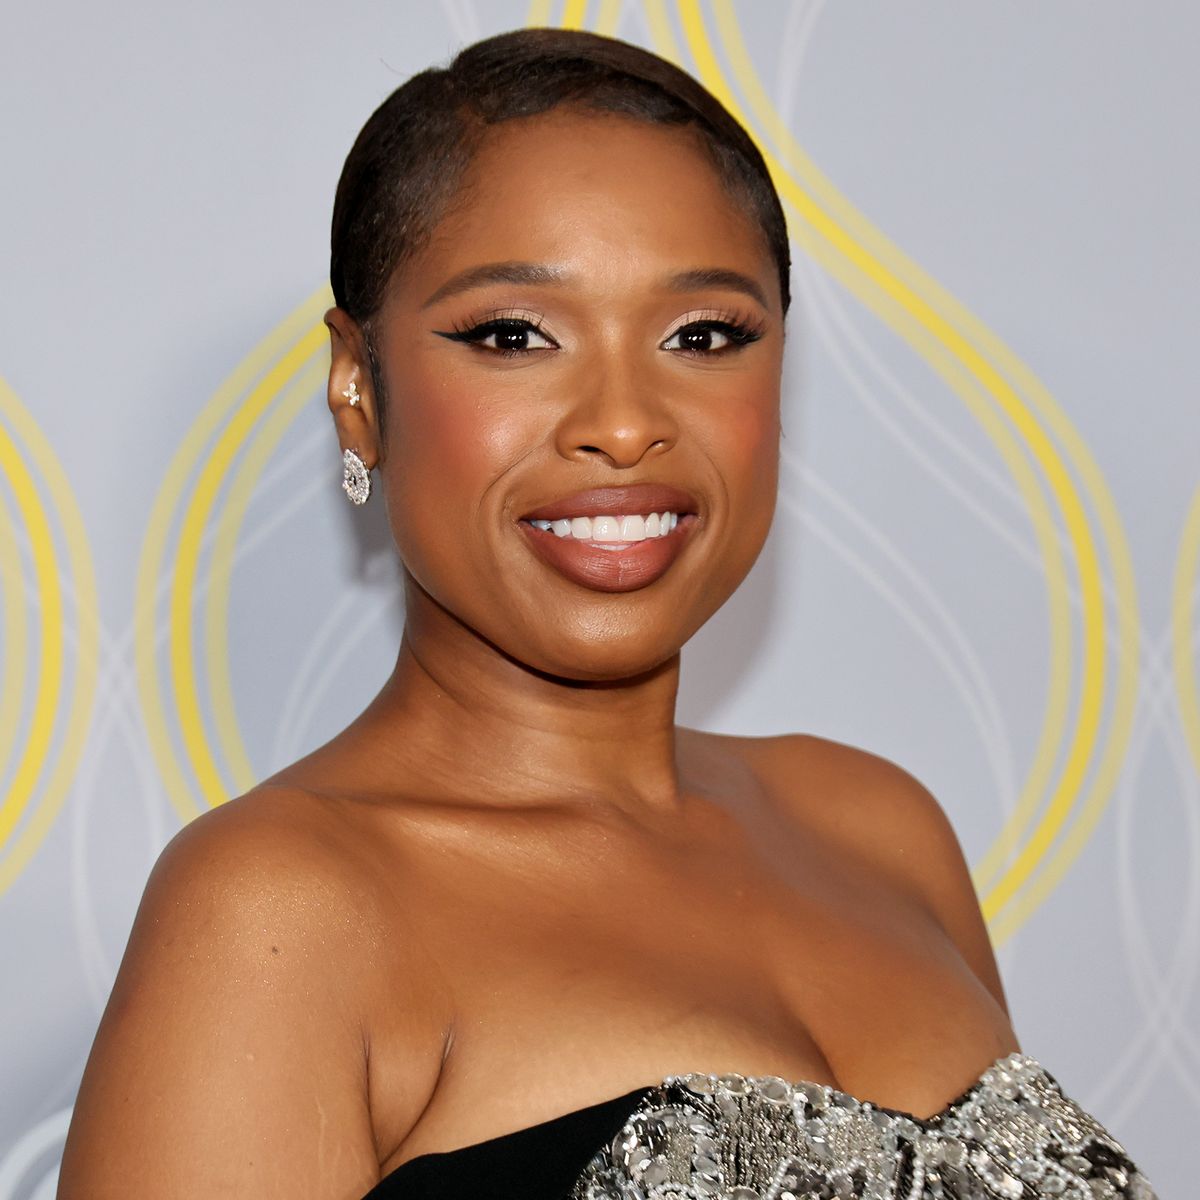 75th Annual Tony Awards - ArrivalsNEW YORK, NEW YORK - JUNE 12: Jennifer Hudson attends the 75th Annual Tony Awards at Radio City Music Hall on June 12, 2022 in New York City. (Photo by Dia Dipasupil/Getty Images)